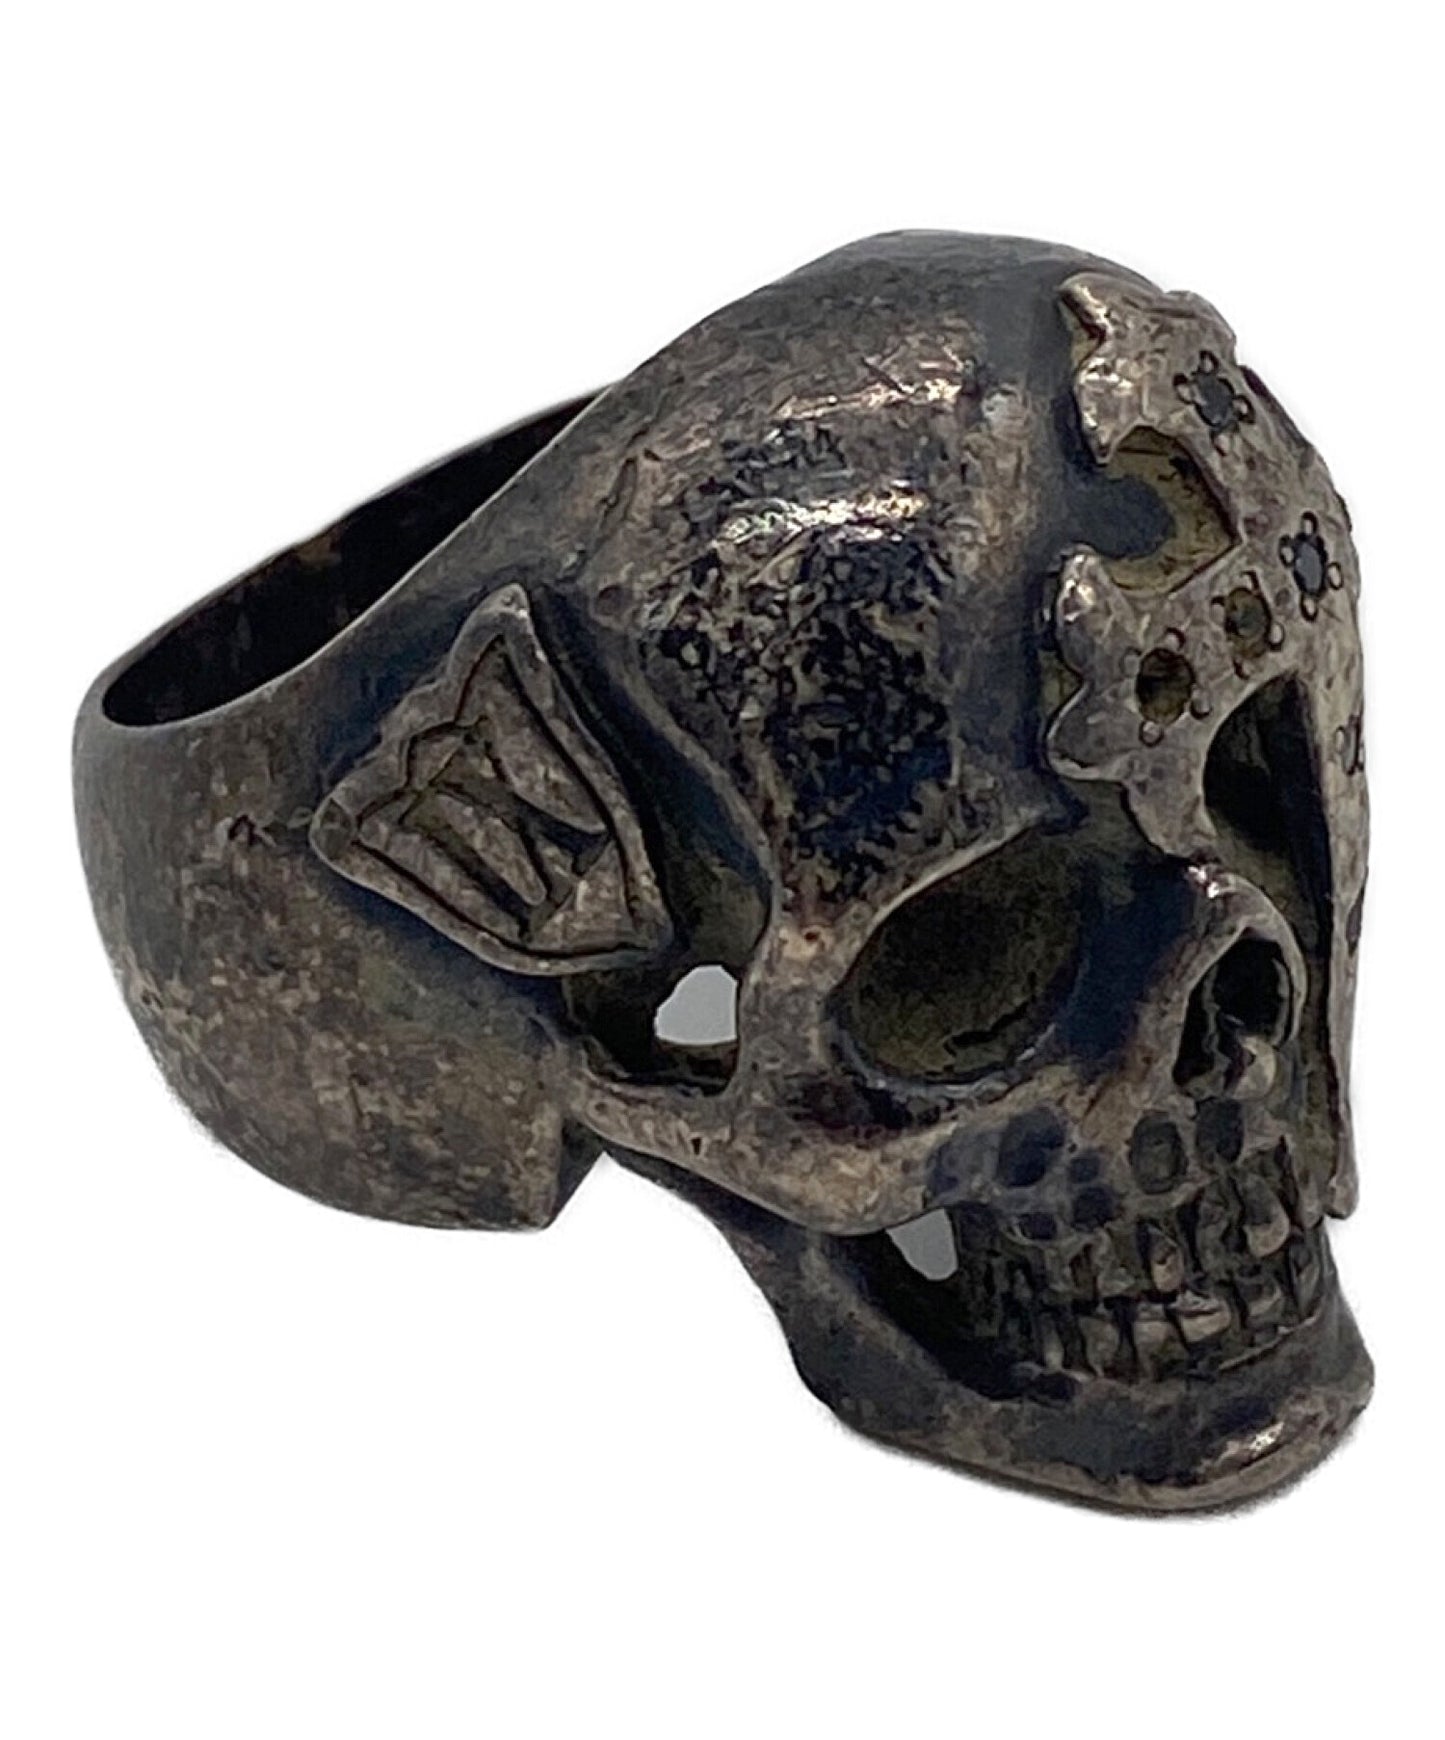 Number (n) Ine × Magical Design 06Aw Skull Ring NM-S5001A